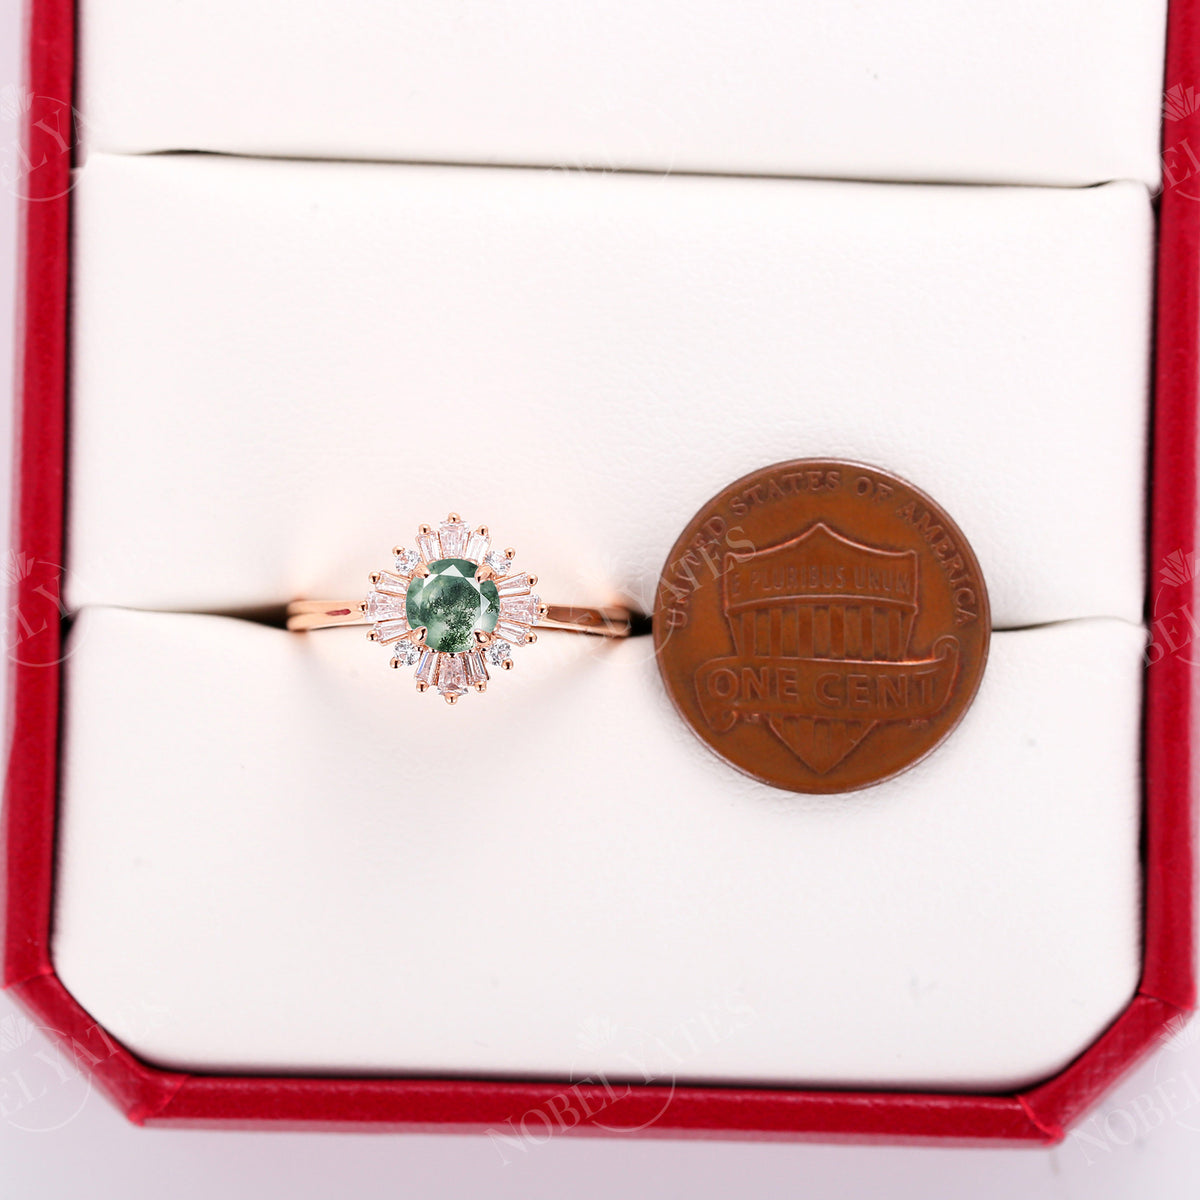 Moss Agate Art Deco Round Halo Engagement Ring Rose Gold